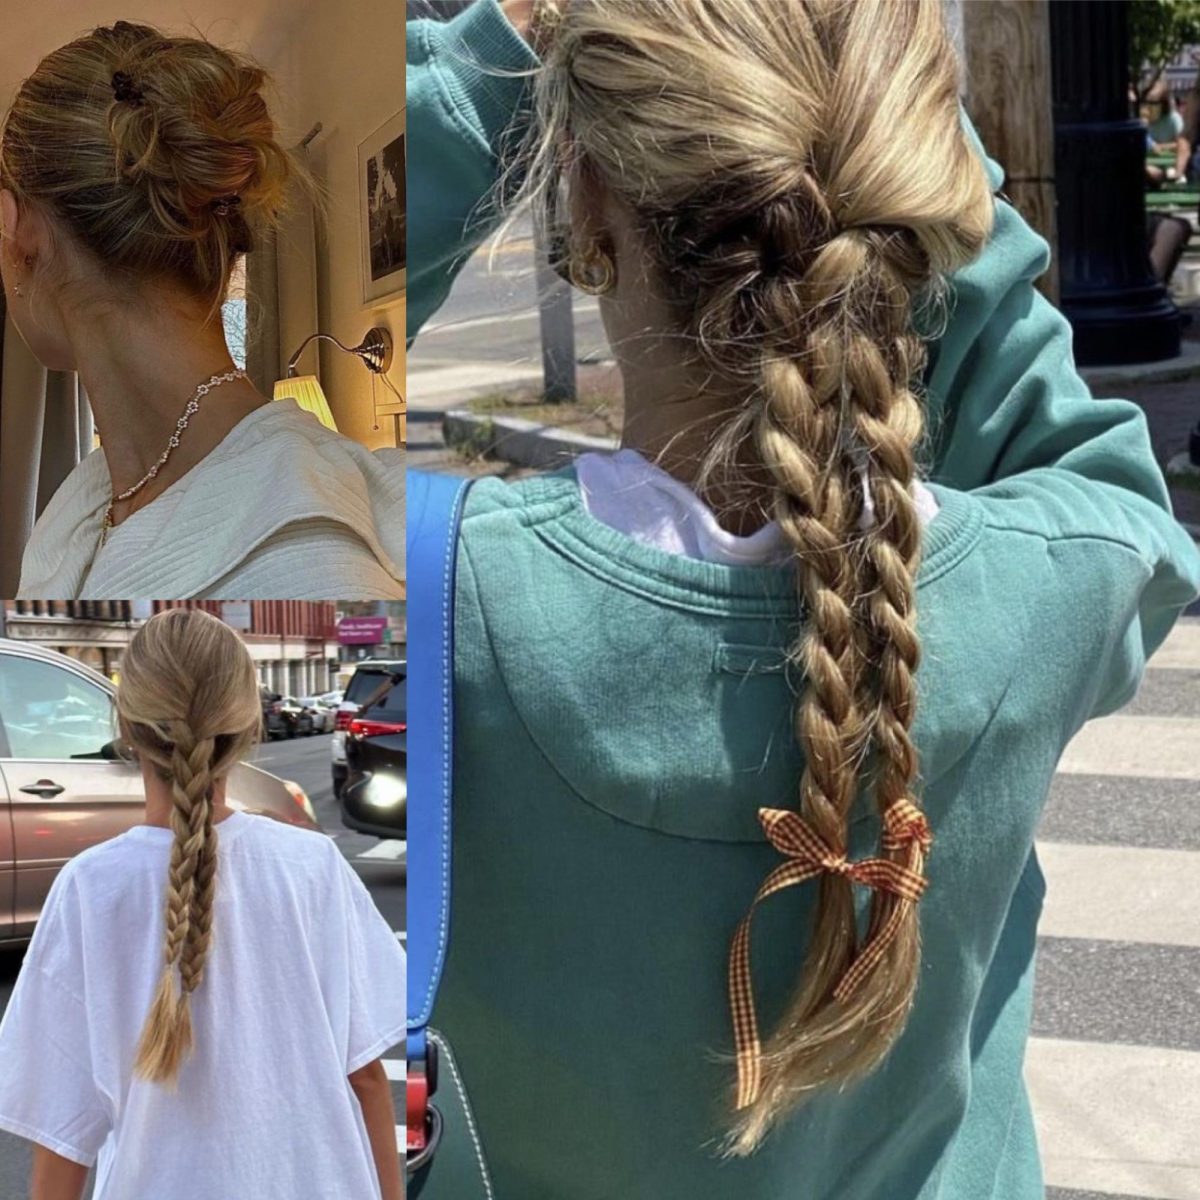 My+favorite+hairstyles%3A+layered+braids+%28bottom+left%29%2C+crossed+braids+%28right%29%2C+and+a+knotted+bun+%28top+left%29.